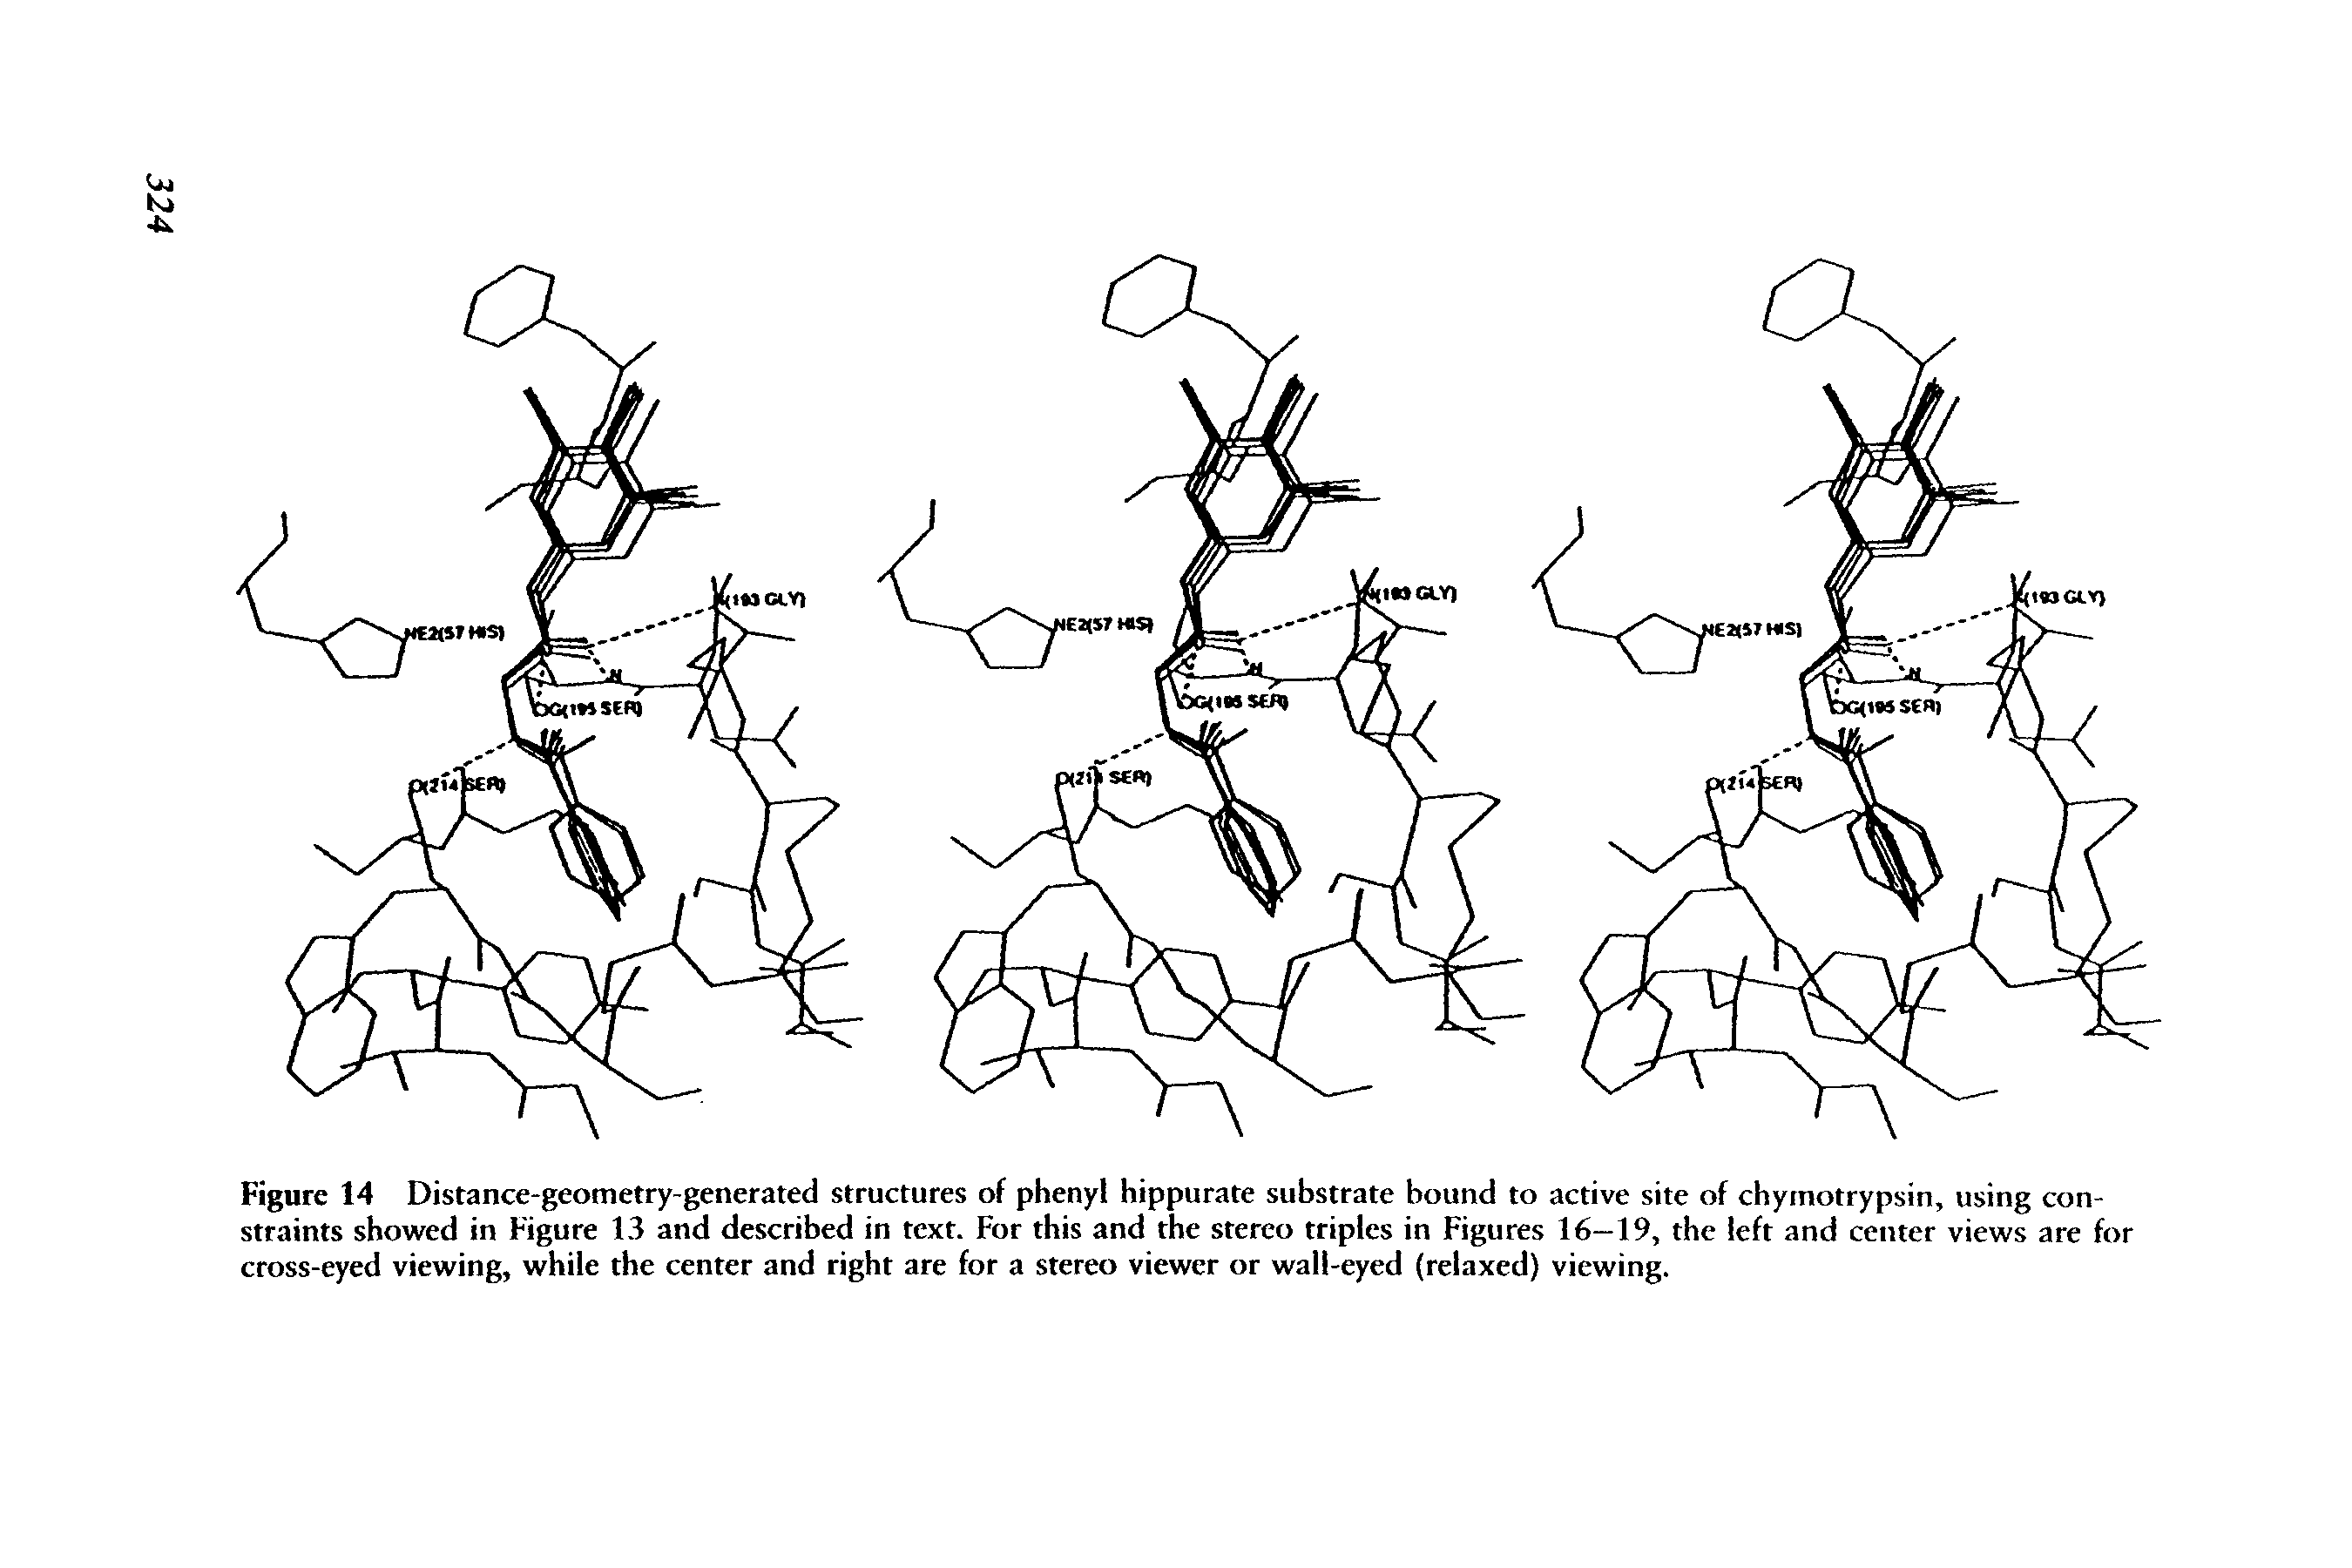 Figure 14 Distance-geometry-generated structures of phenyl hippurate substrate bound to active site of chymotrypsin, using constraints showed in Figure 13 and described in text. For this and the stereo triples in Figures 16—19, the left and center views are for cross-eyed viewing, while the center and right are for a stereo viewer or wall-eyed (relaxed) viewing.